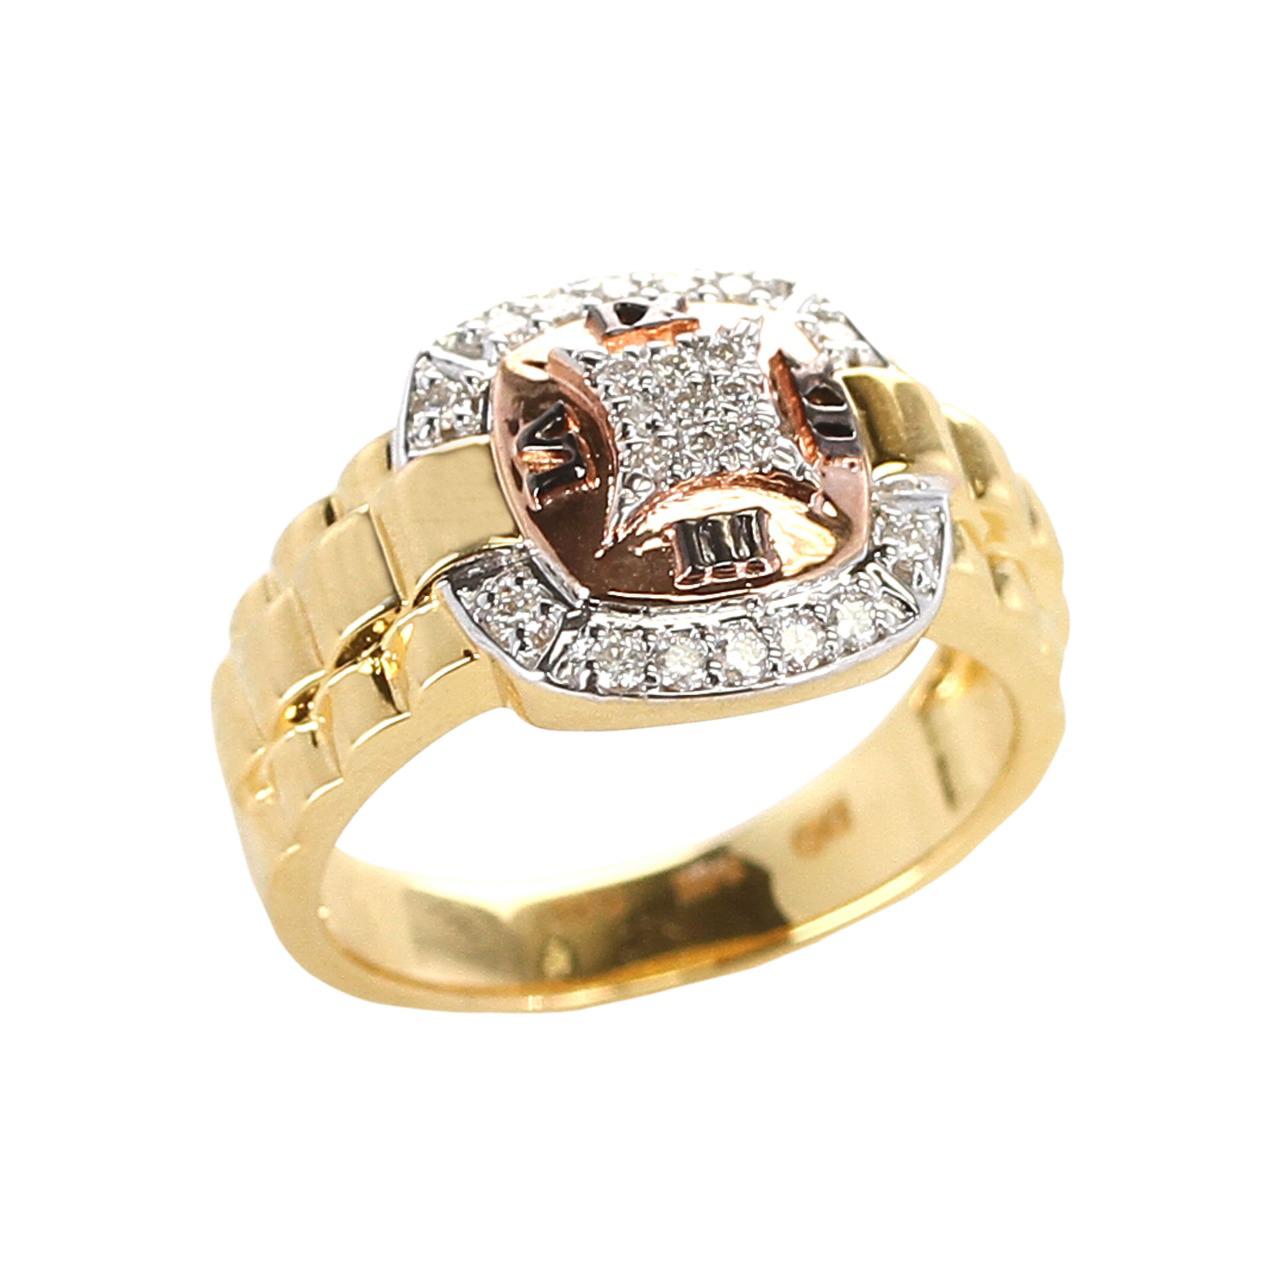 Women's or Men's 14 Karat Yellow Gold with Rose Gold Diamond and Watch Style Band Ring